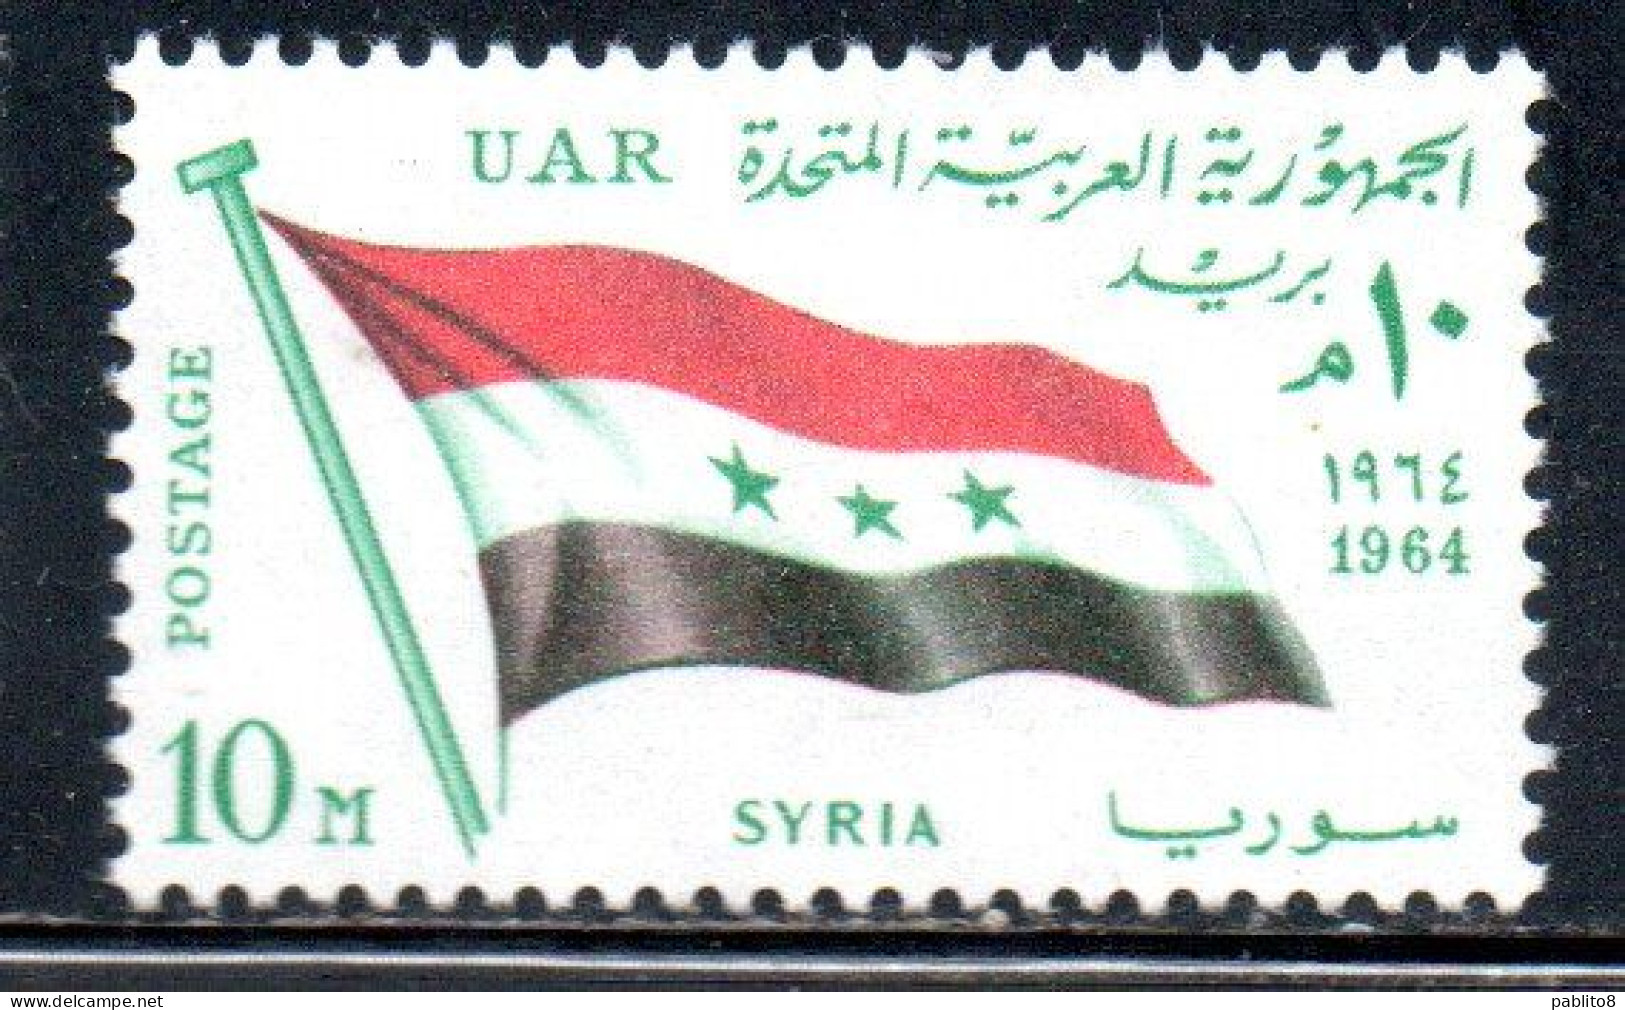 UAR EGYPT EGITTO 1964 SECOND MEETING OF HEADS STATE ARAB LEAGUE FLAG OF SYRIA 10m MH - Neufs